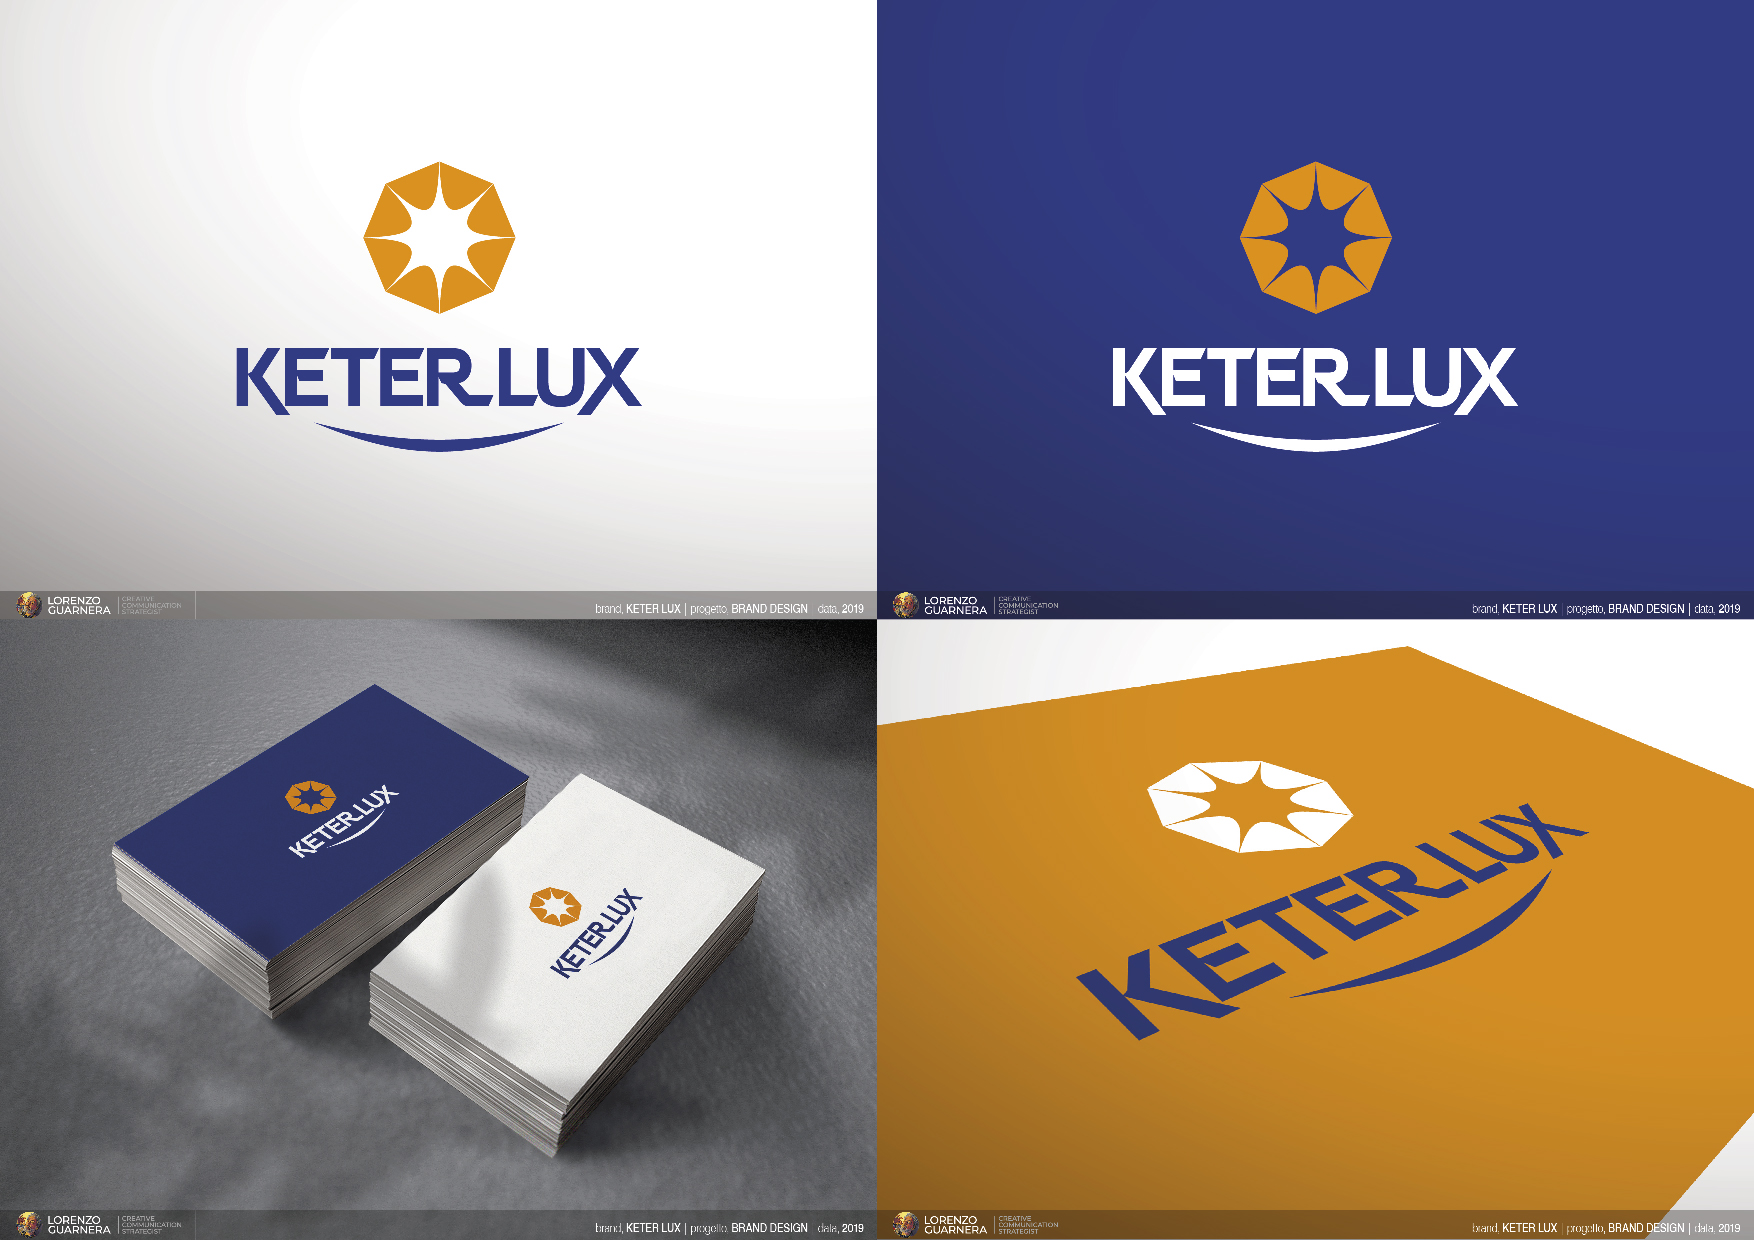 KETER LUX